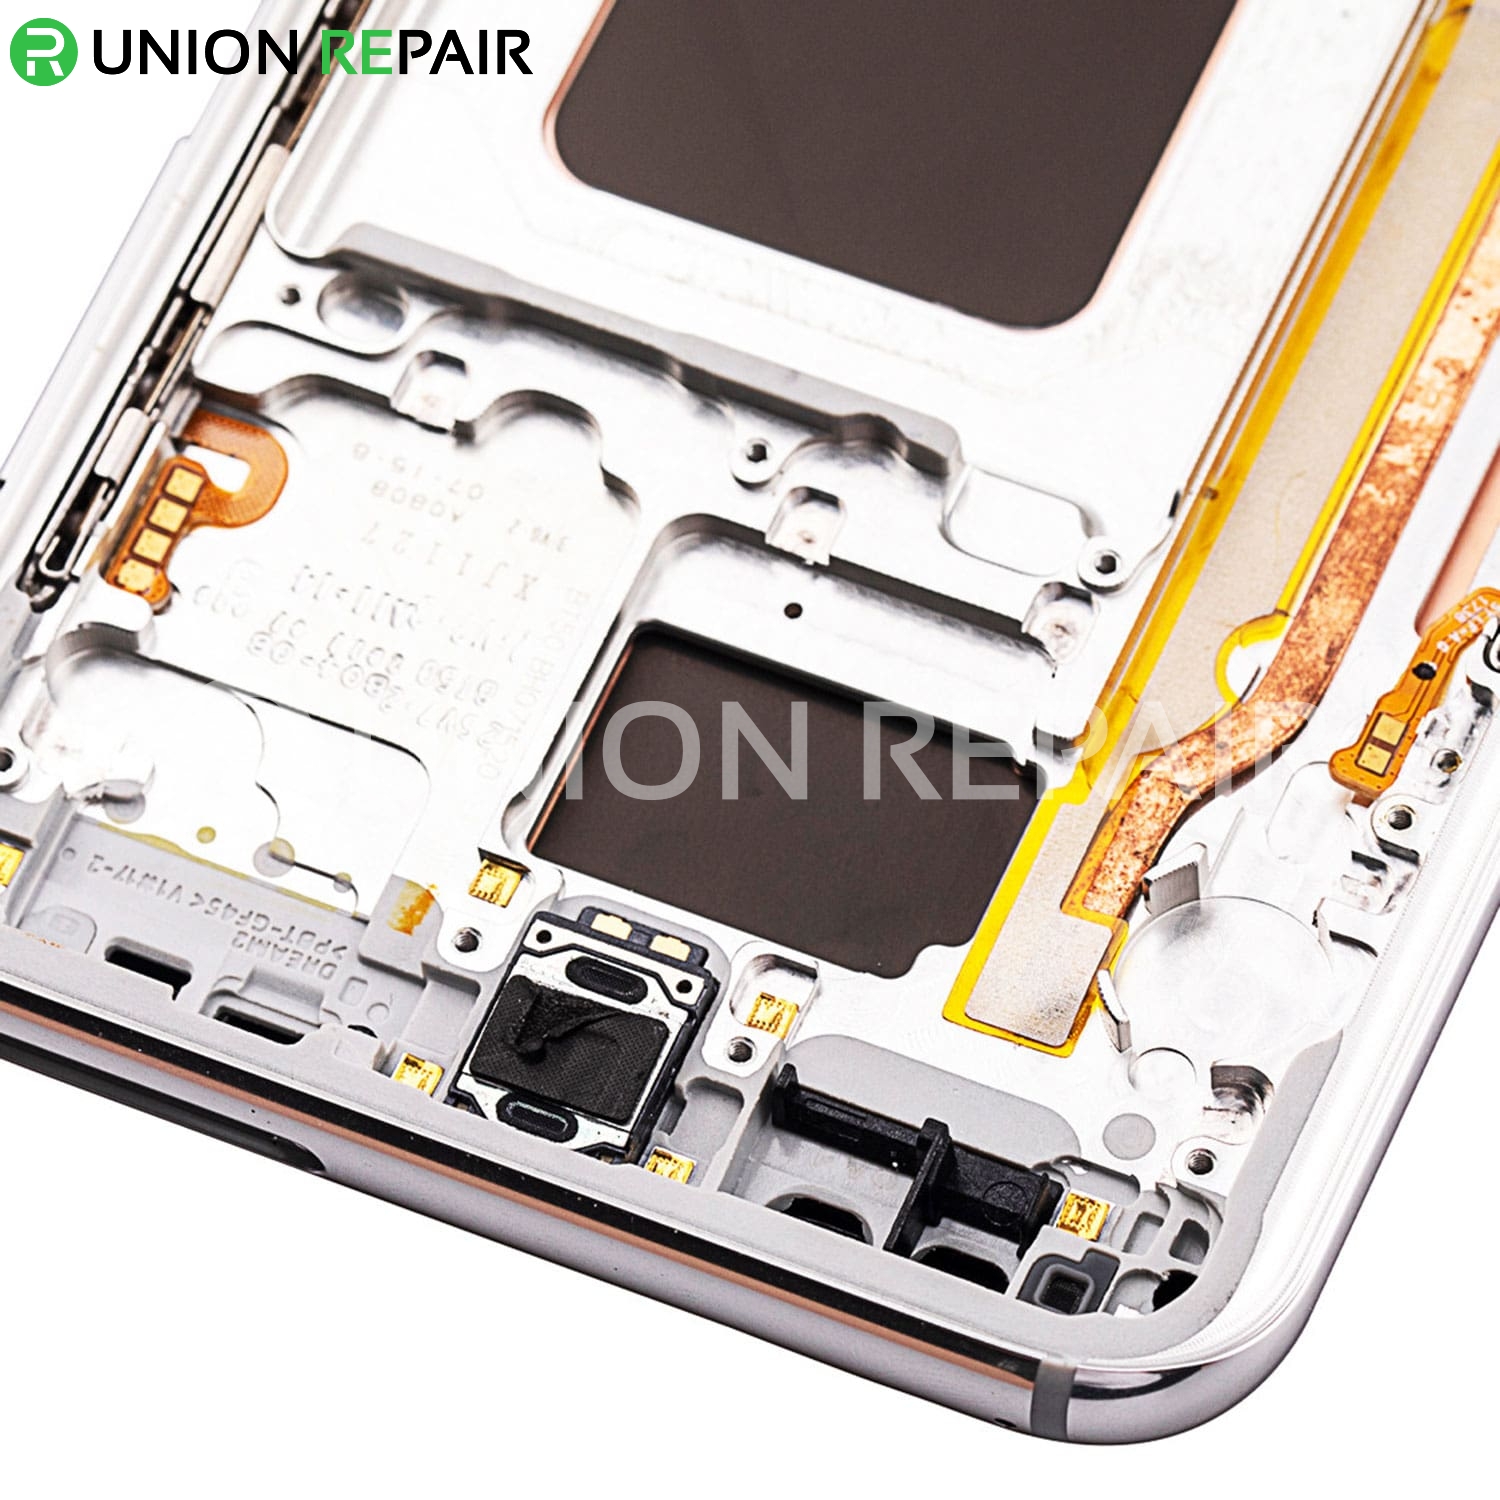 Replacement for Samsung Galaxy S8 Plus SM-G955 LCD Screen Assembly - Arctic Silver